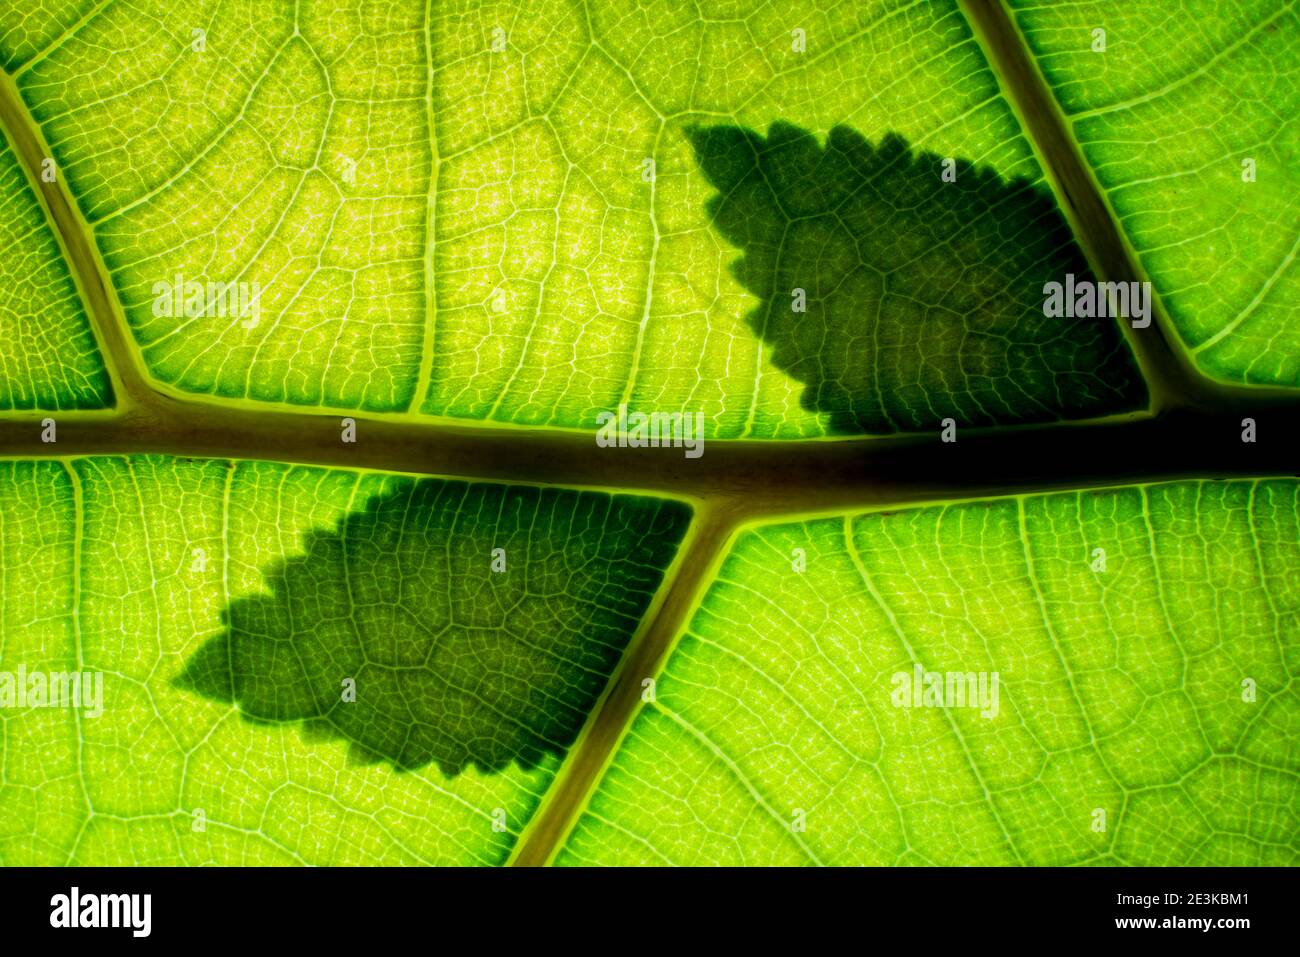 Concept of Environmental awareness of Green Backlit Leaf Vein Stock Photo